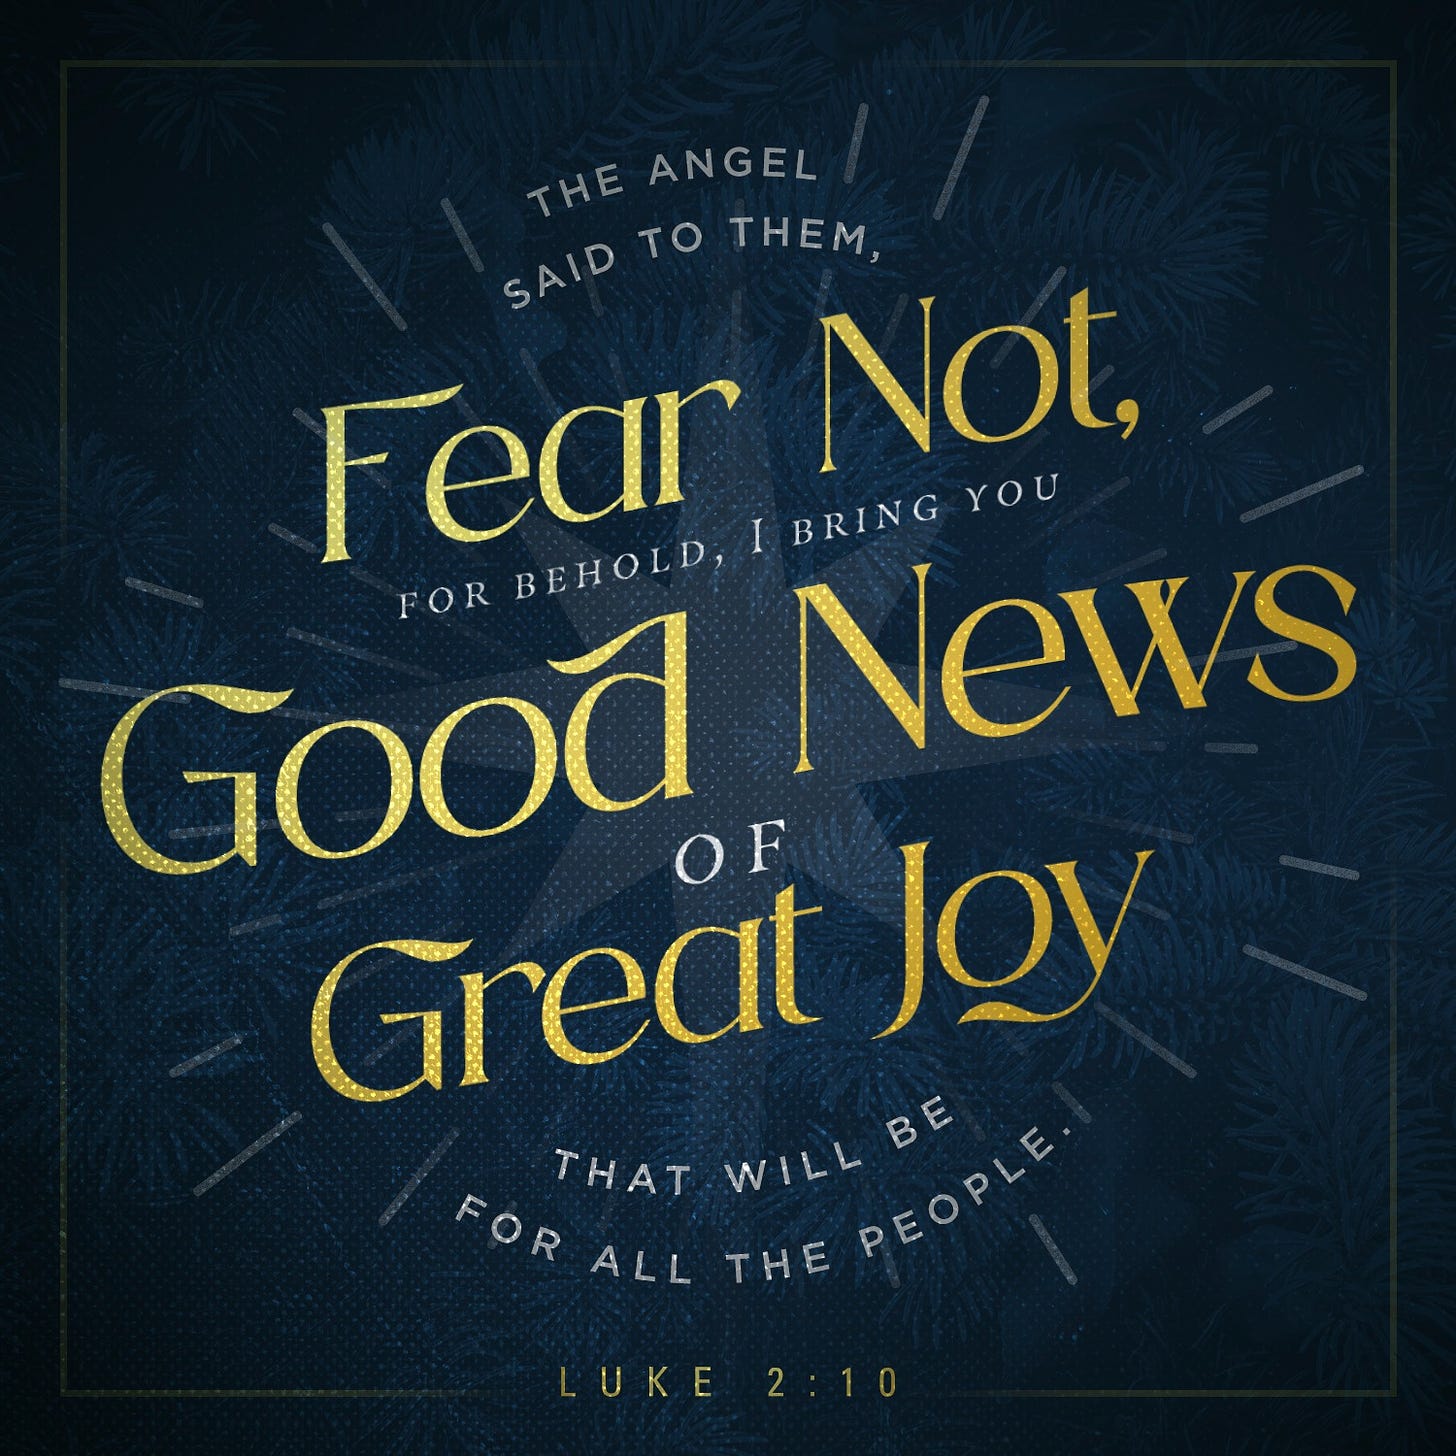 May be an image of text that says 'THE ANGEL SAID TO THEM, Fear BRING YOU Not, Good OF FOR BEHOLD, News Great Joy THAT THE WILL THEPEOPLE FOR ALL PEOPLE PEOPLE LUKE2:10'